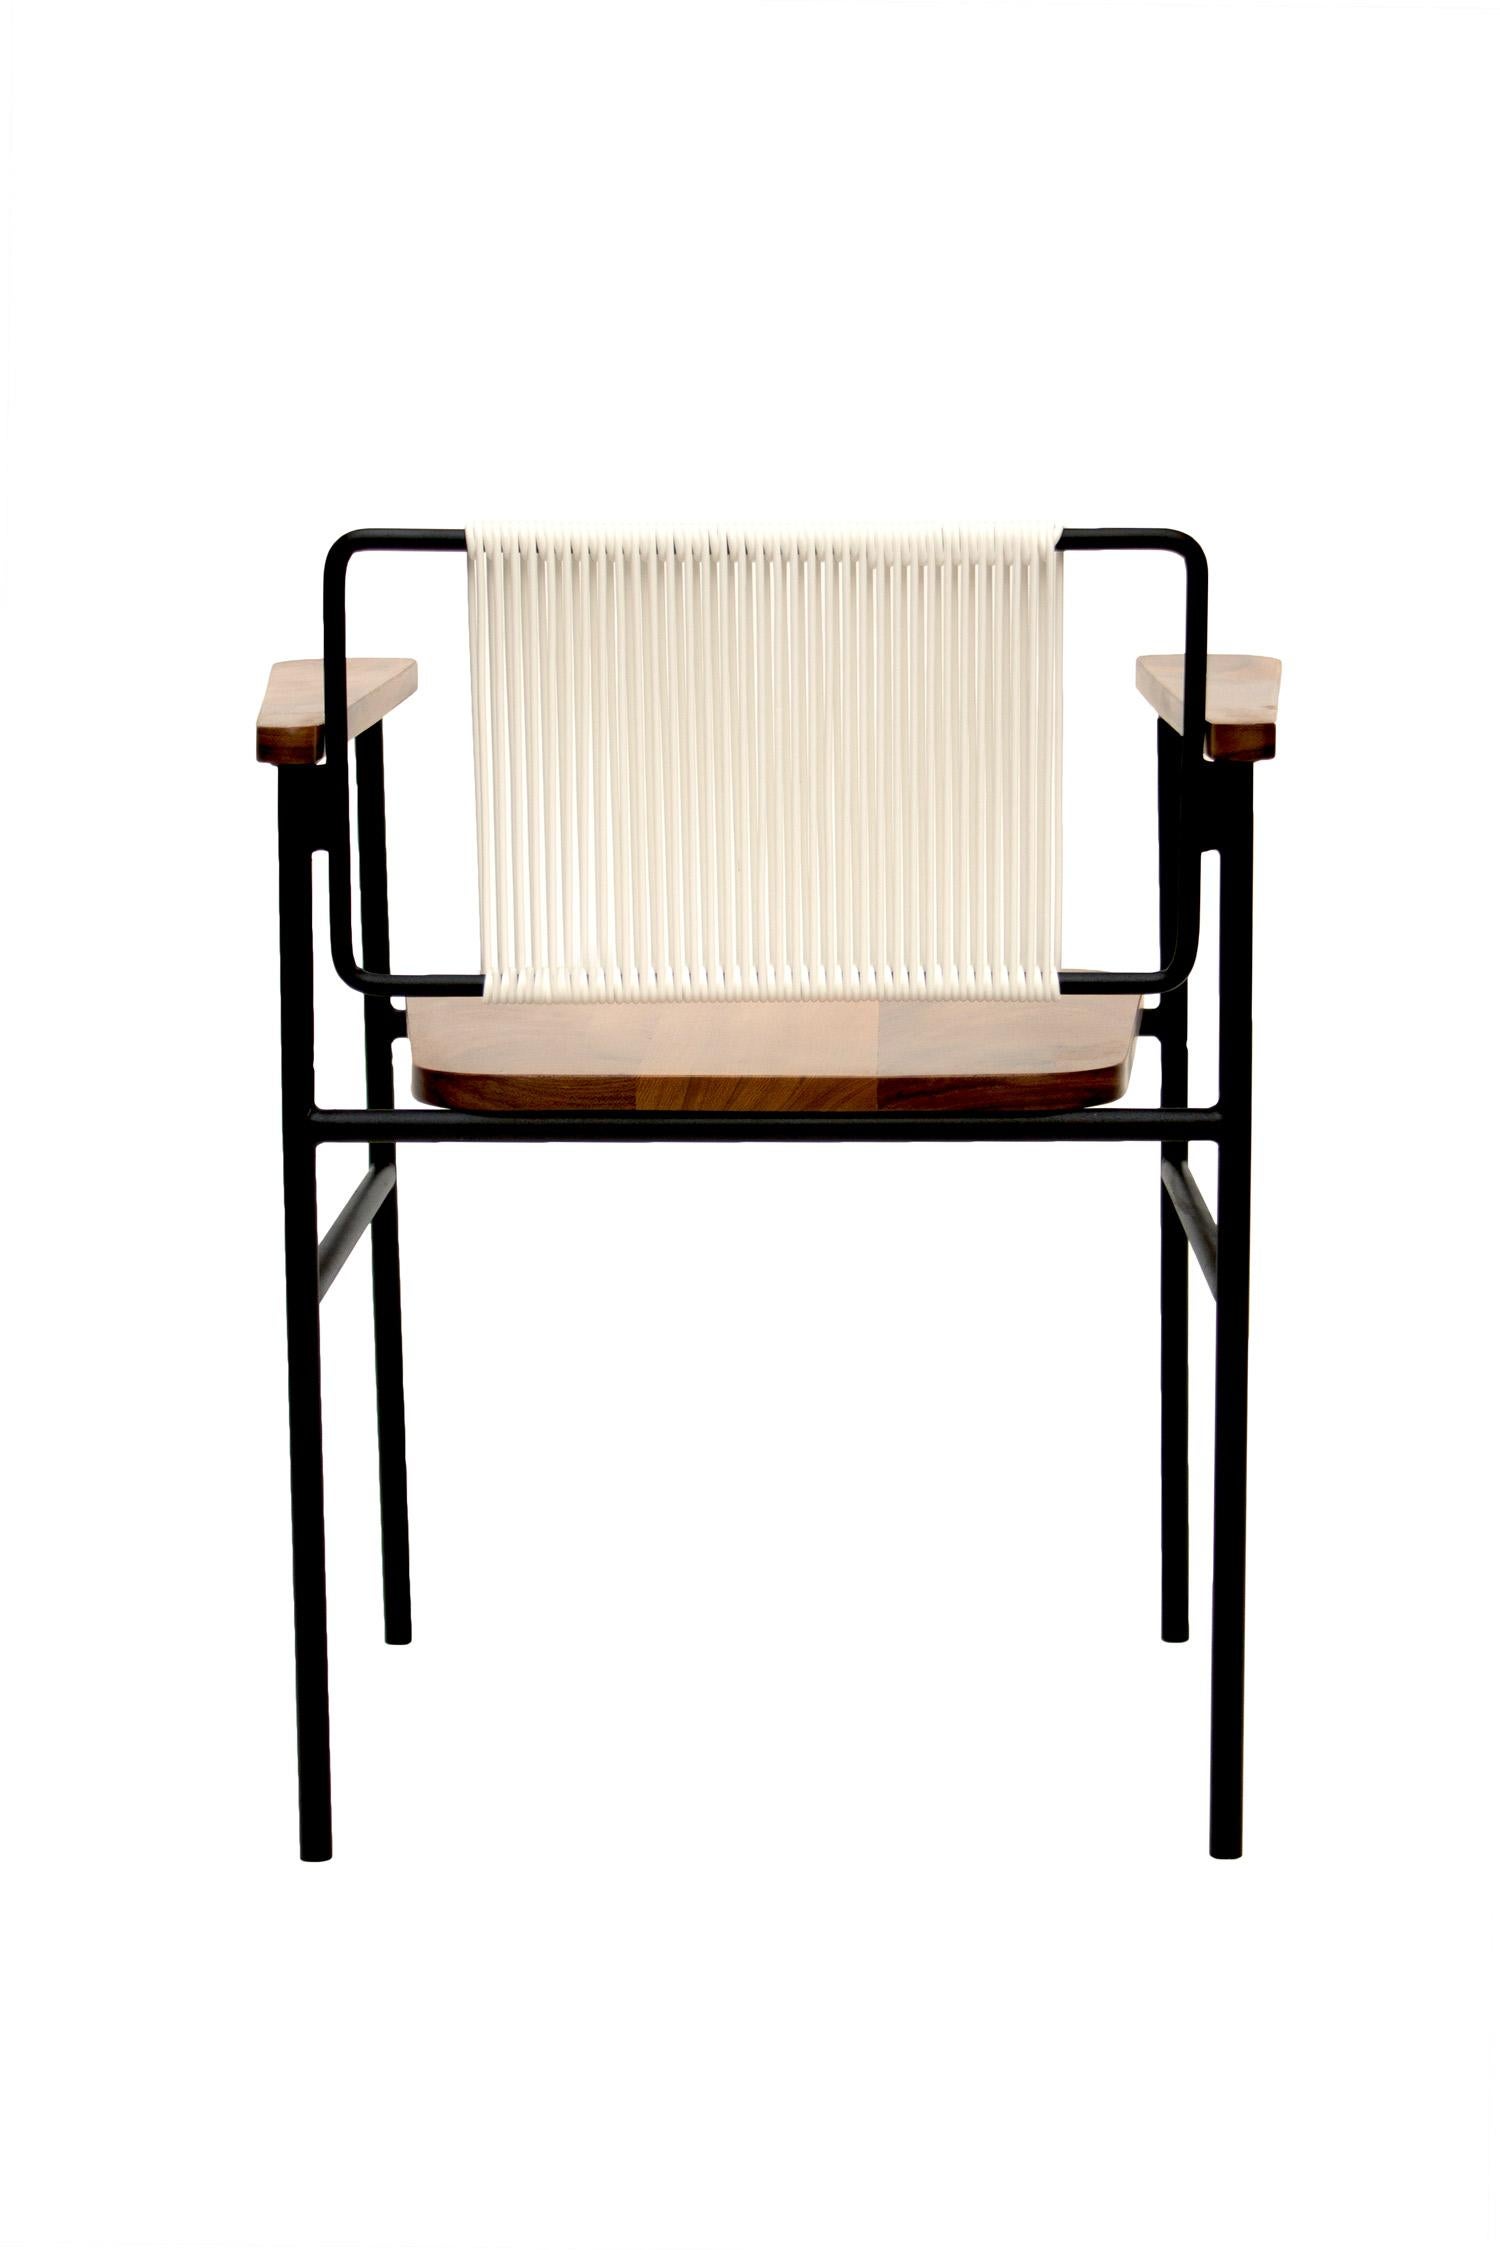 Mexican Handcrafted Mid-Century Mita Armchair, Tropical Parota Wood & Outdoor Pad For Sale